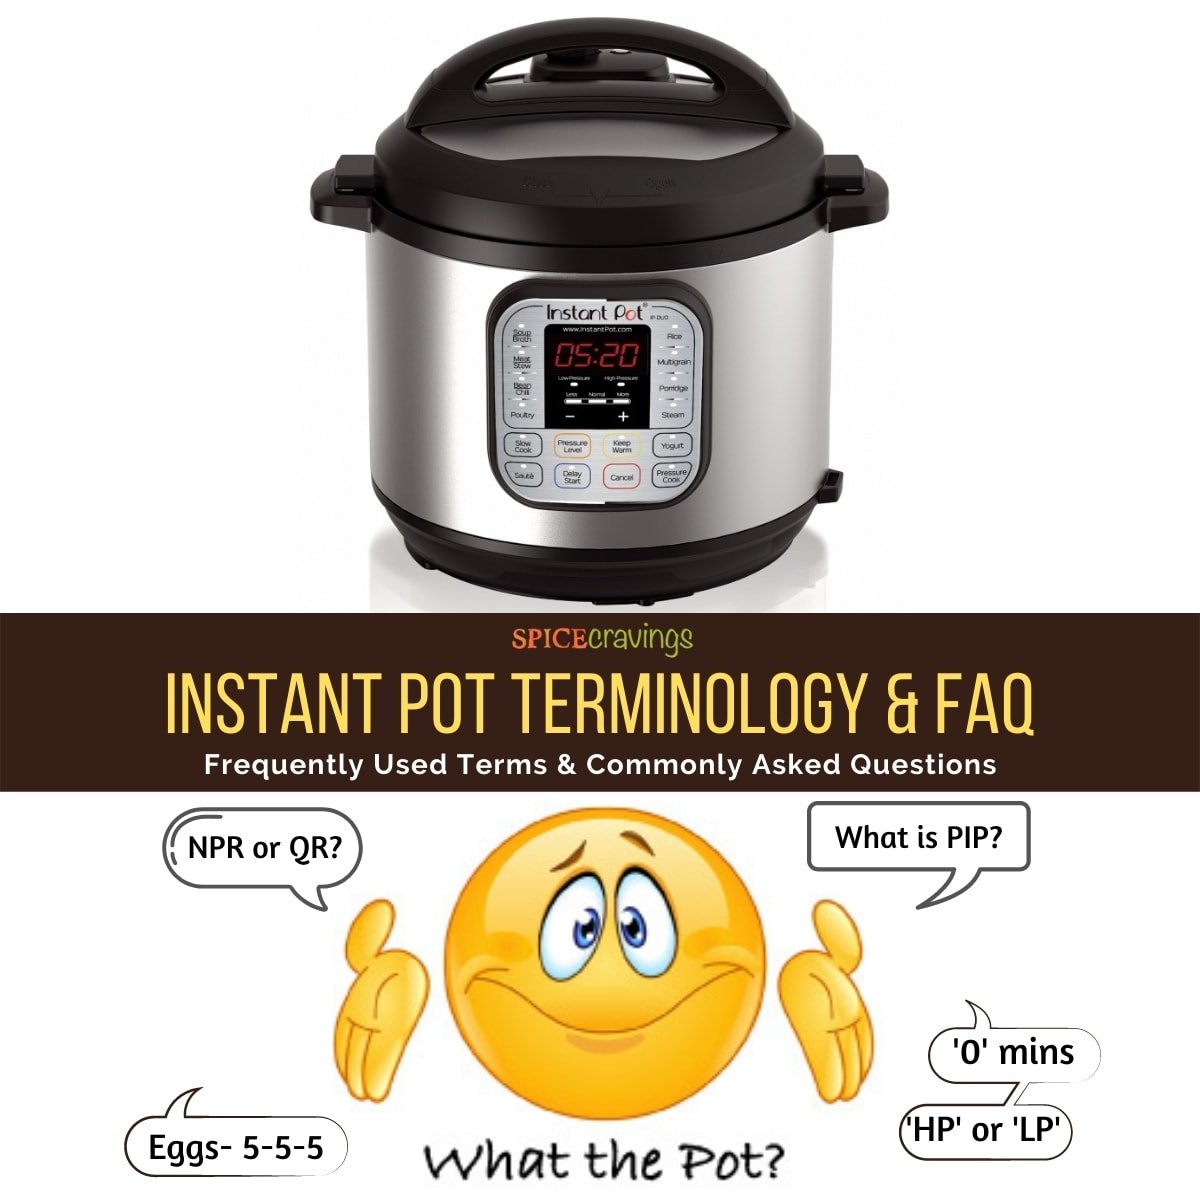 Instant Pot Terminology & Commonly Asked Questions